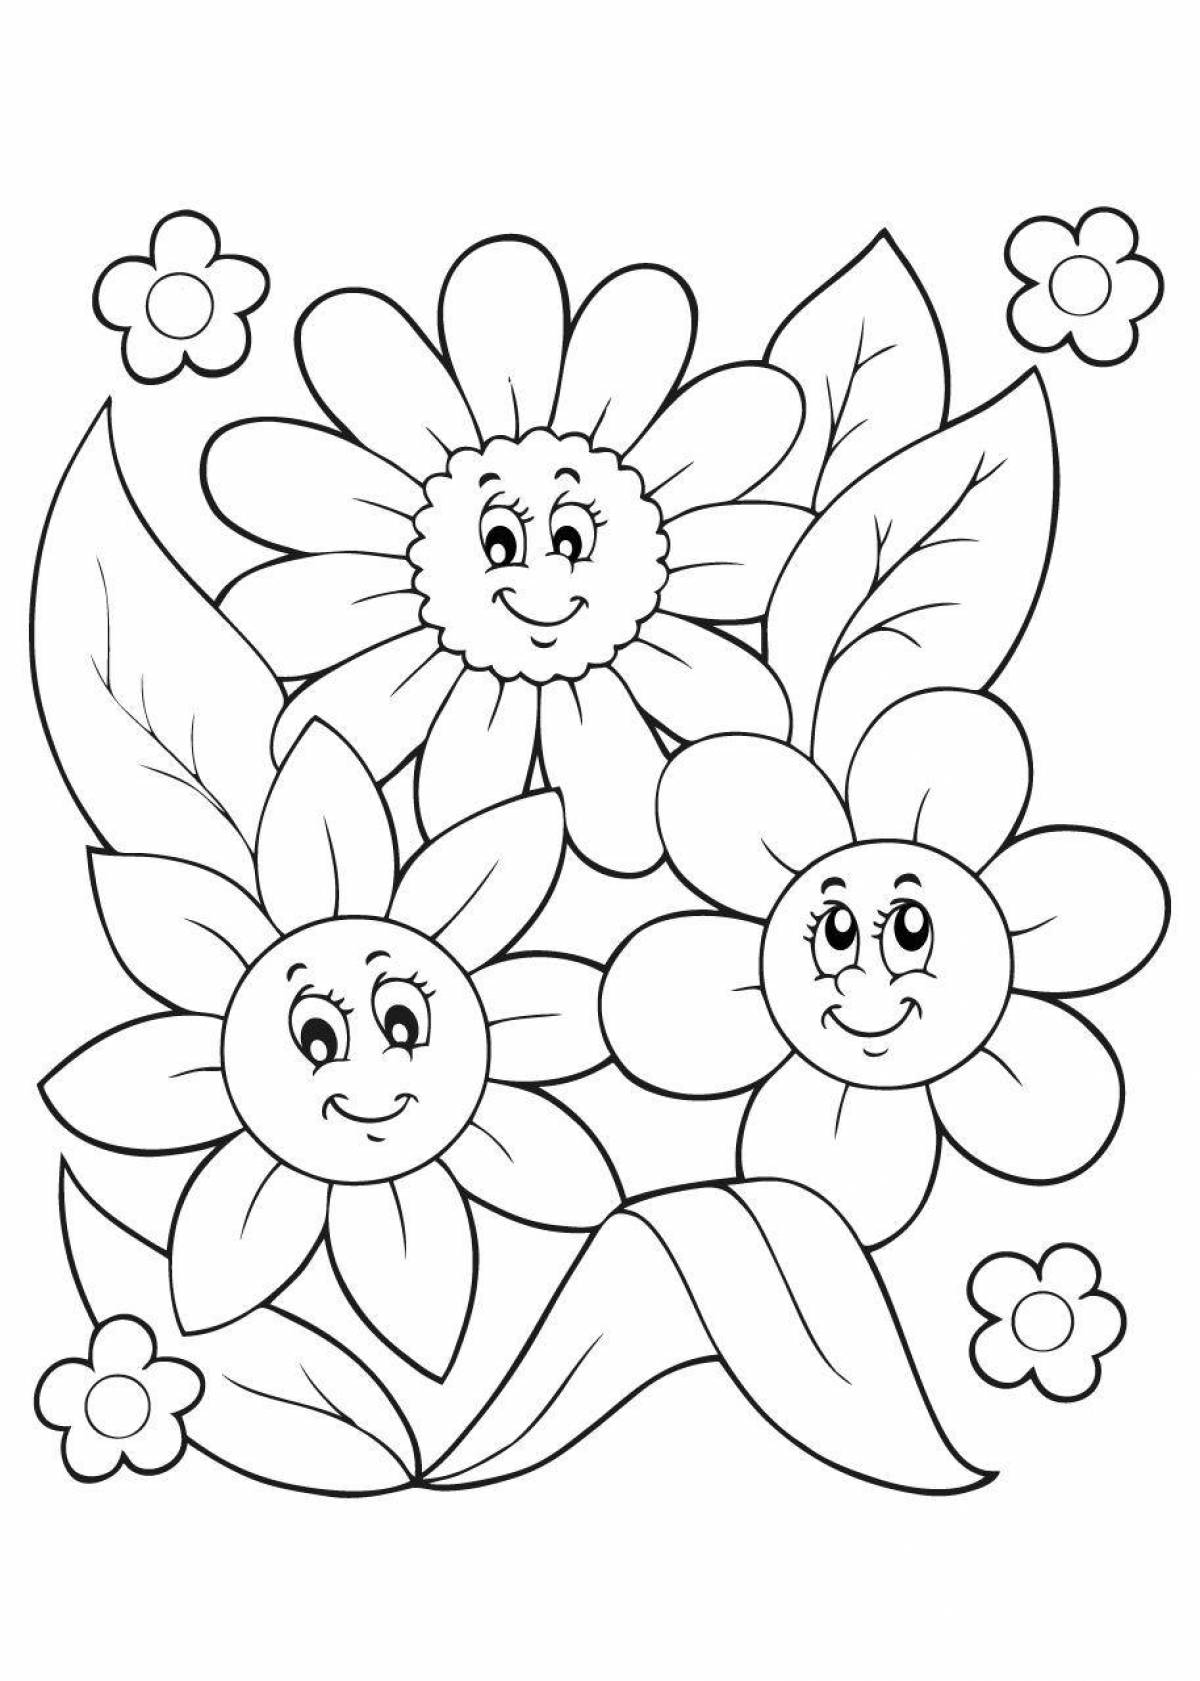 Radiant coloring flowers for children 7 years old